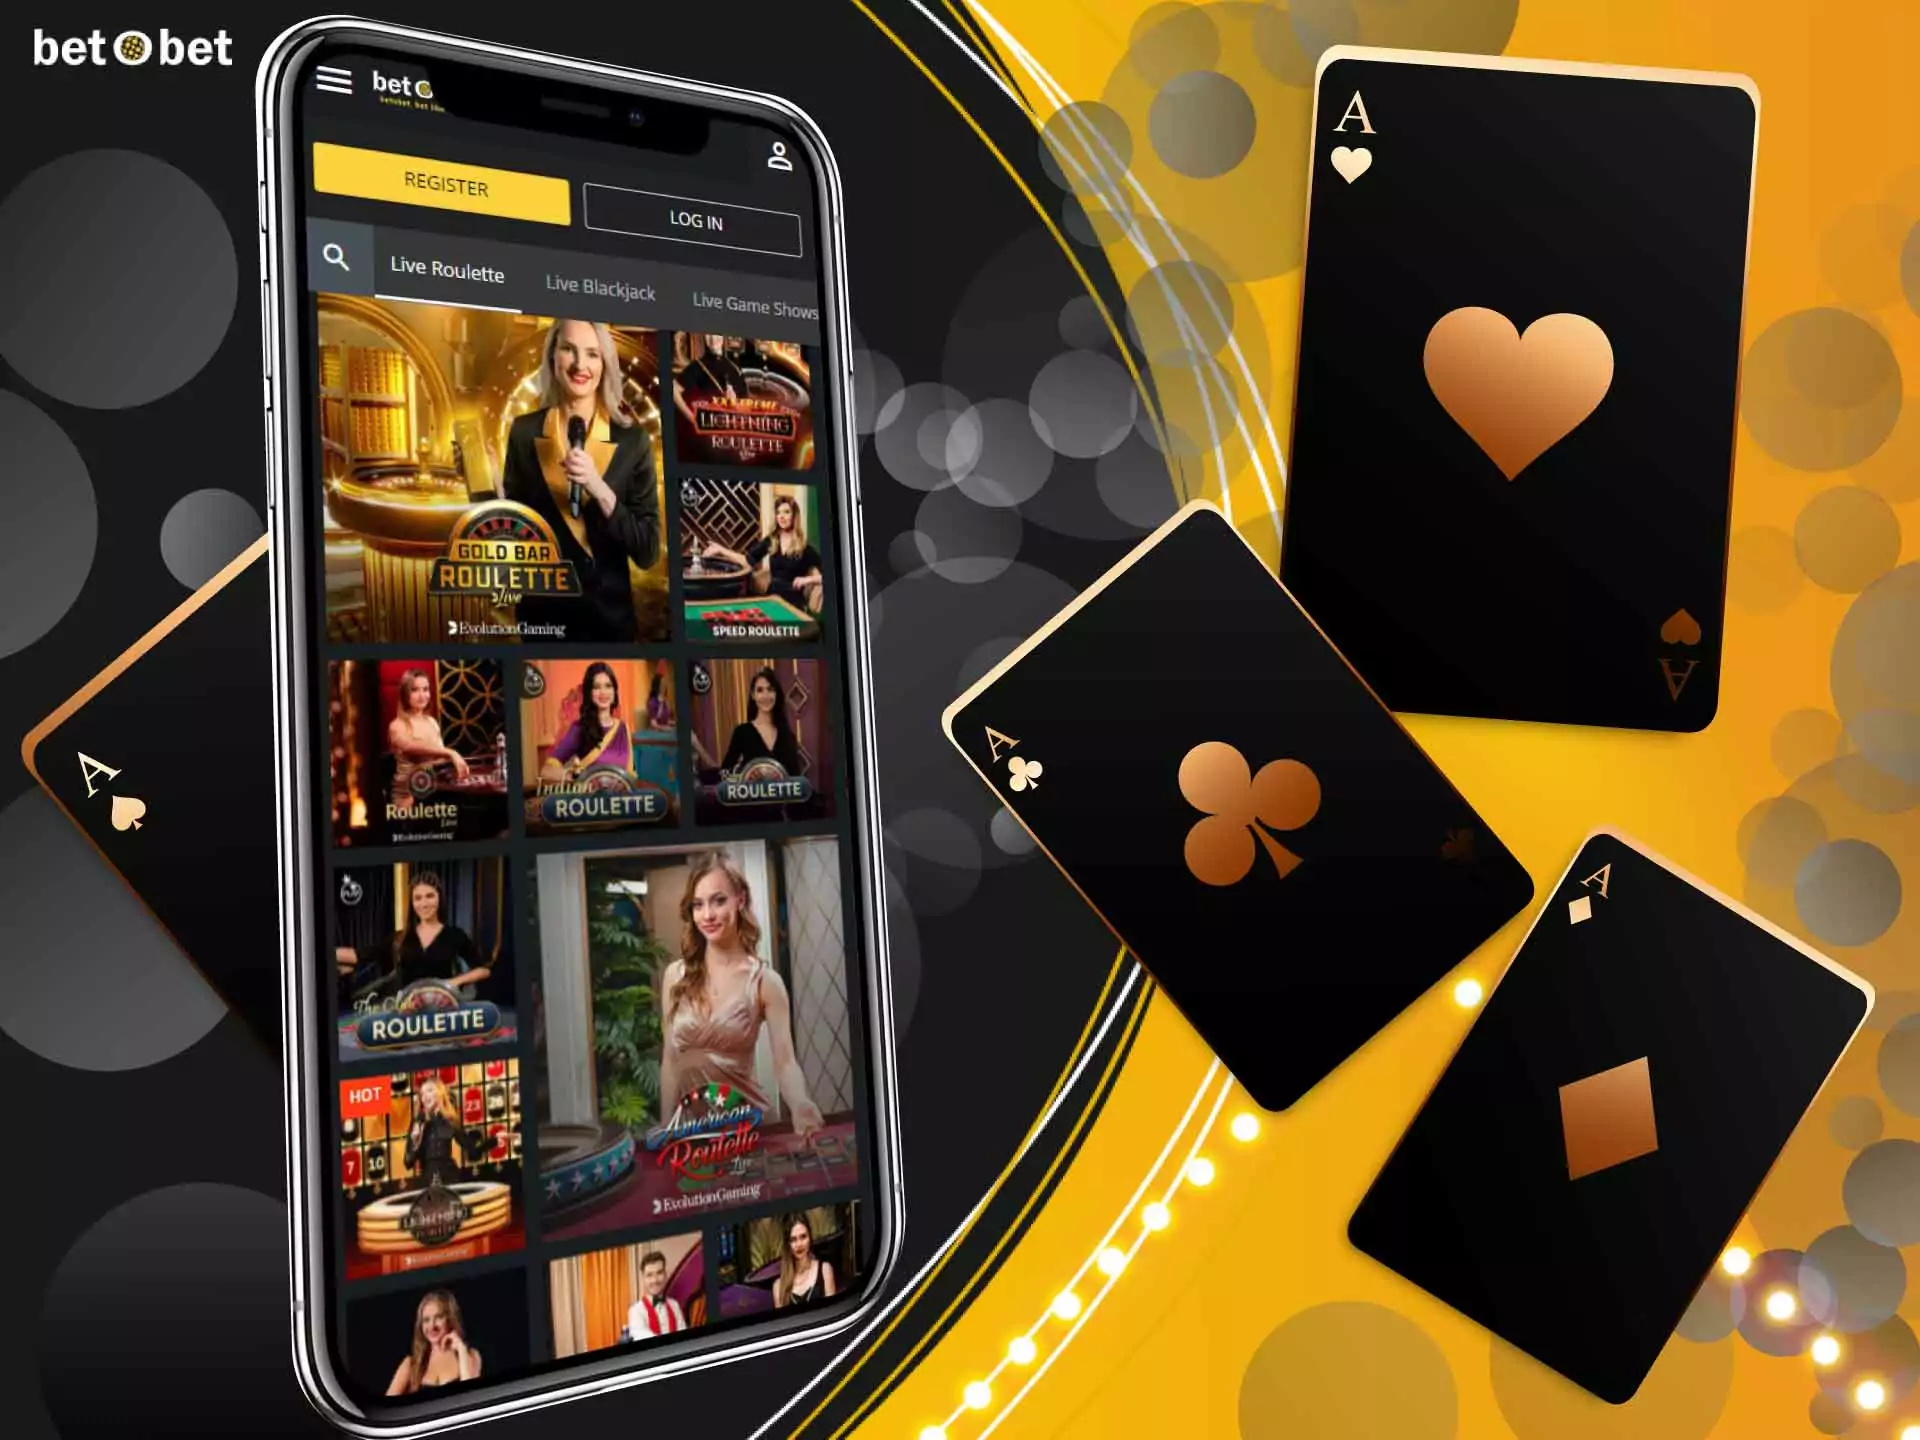 Play casino games against the real dealers at BetOBet.